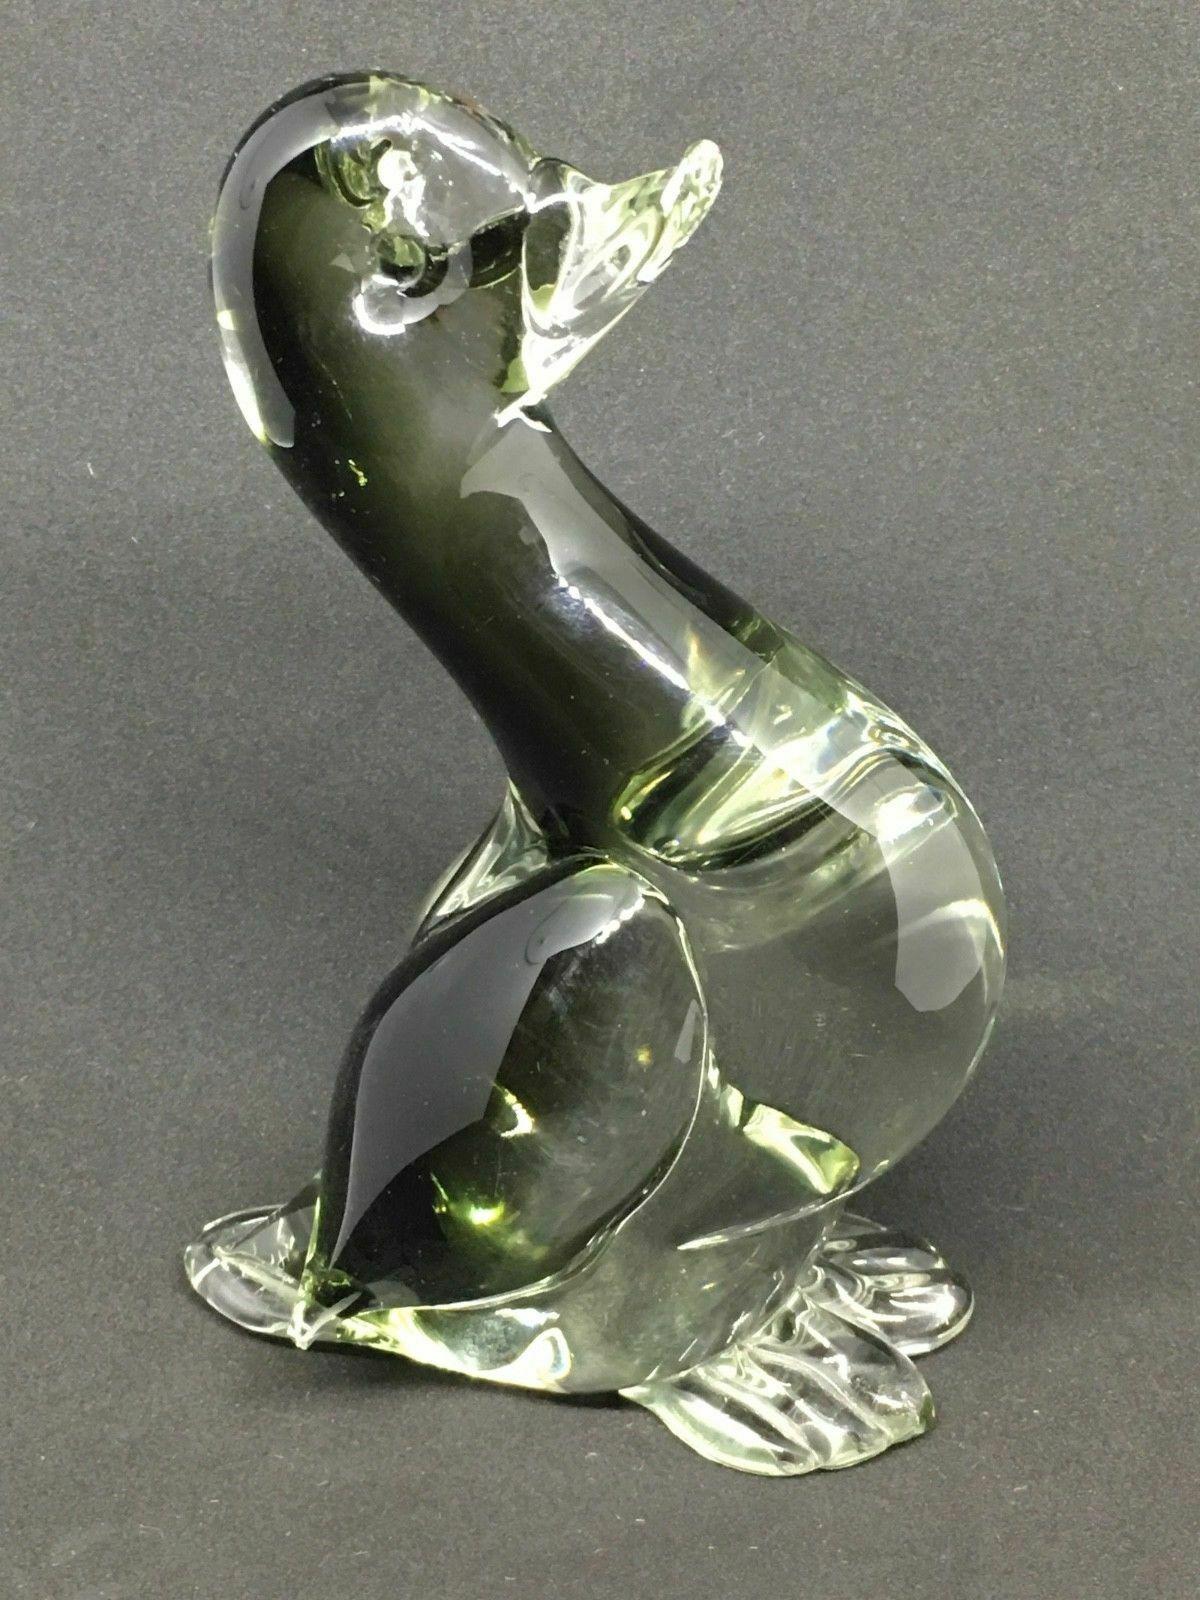 A Venetian sculptural duck figurine in hand blown glass, produced on the isle of Murano, circa 1970s. A nice piece of art for any room.